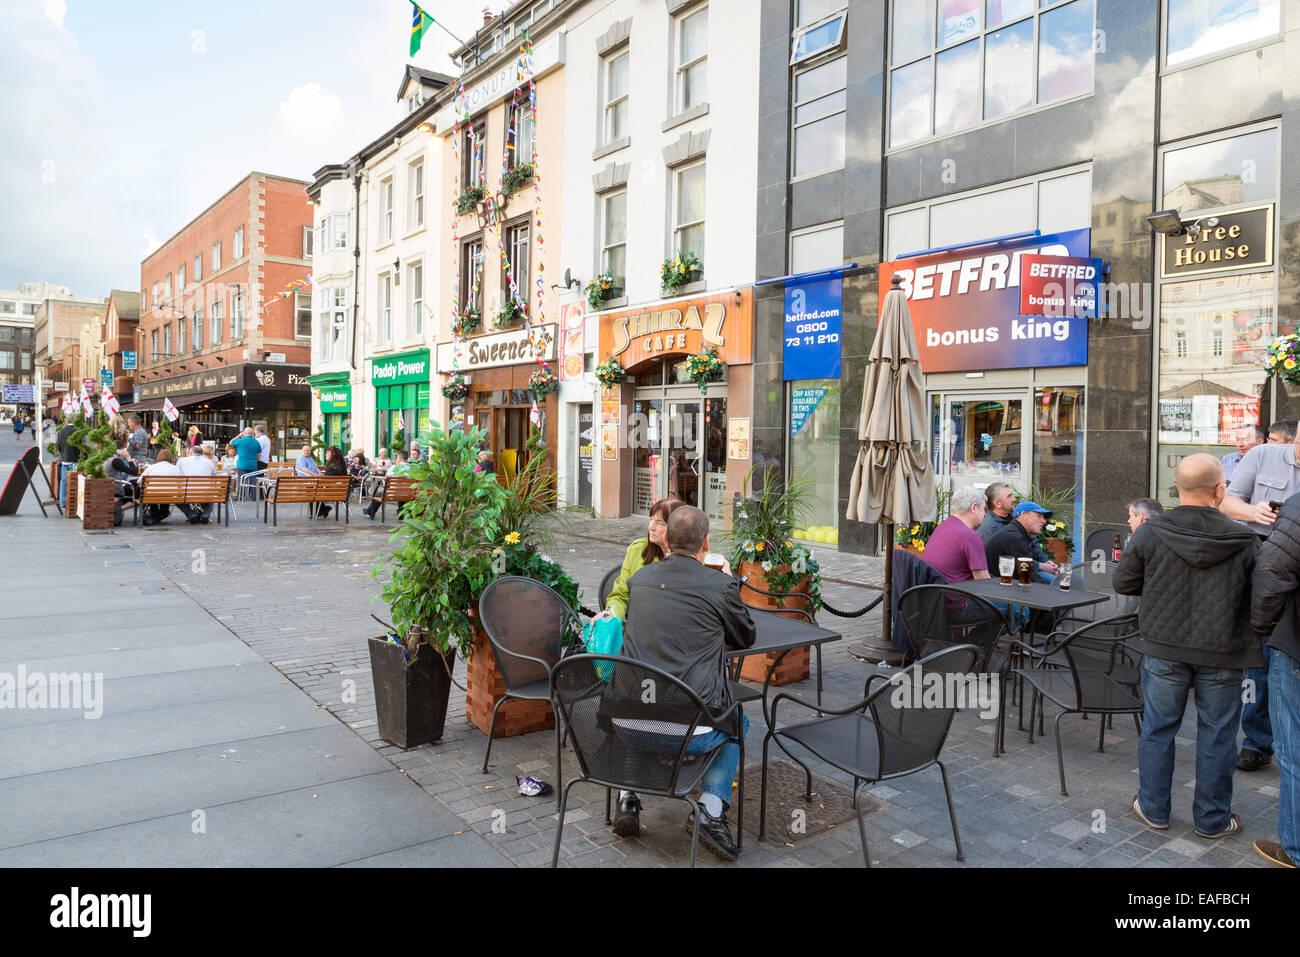 LIVERPOOL, UNITED KINGDOM - JUNE 7, 2014: Saturday afternoon in Liverpool, people have fun in the exterior of a Pub Stock Photo